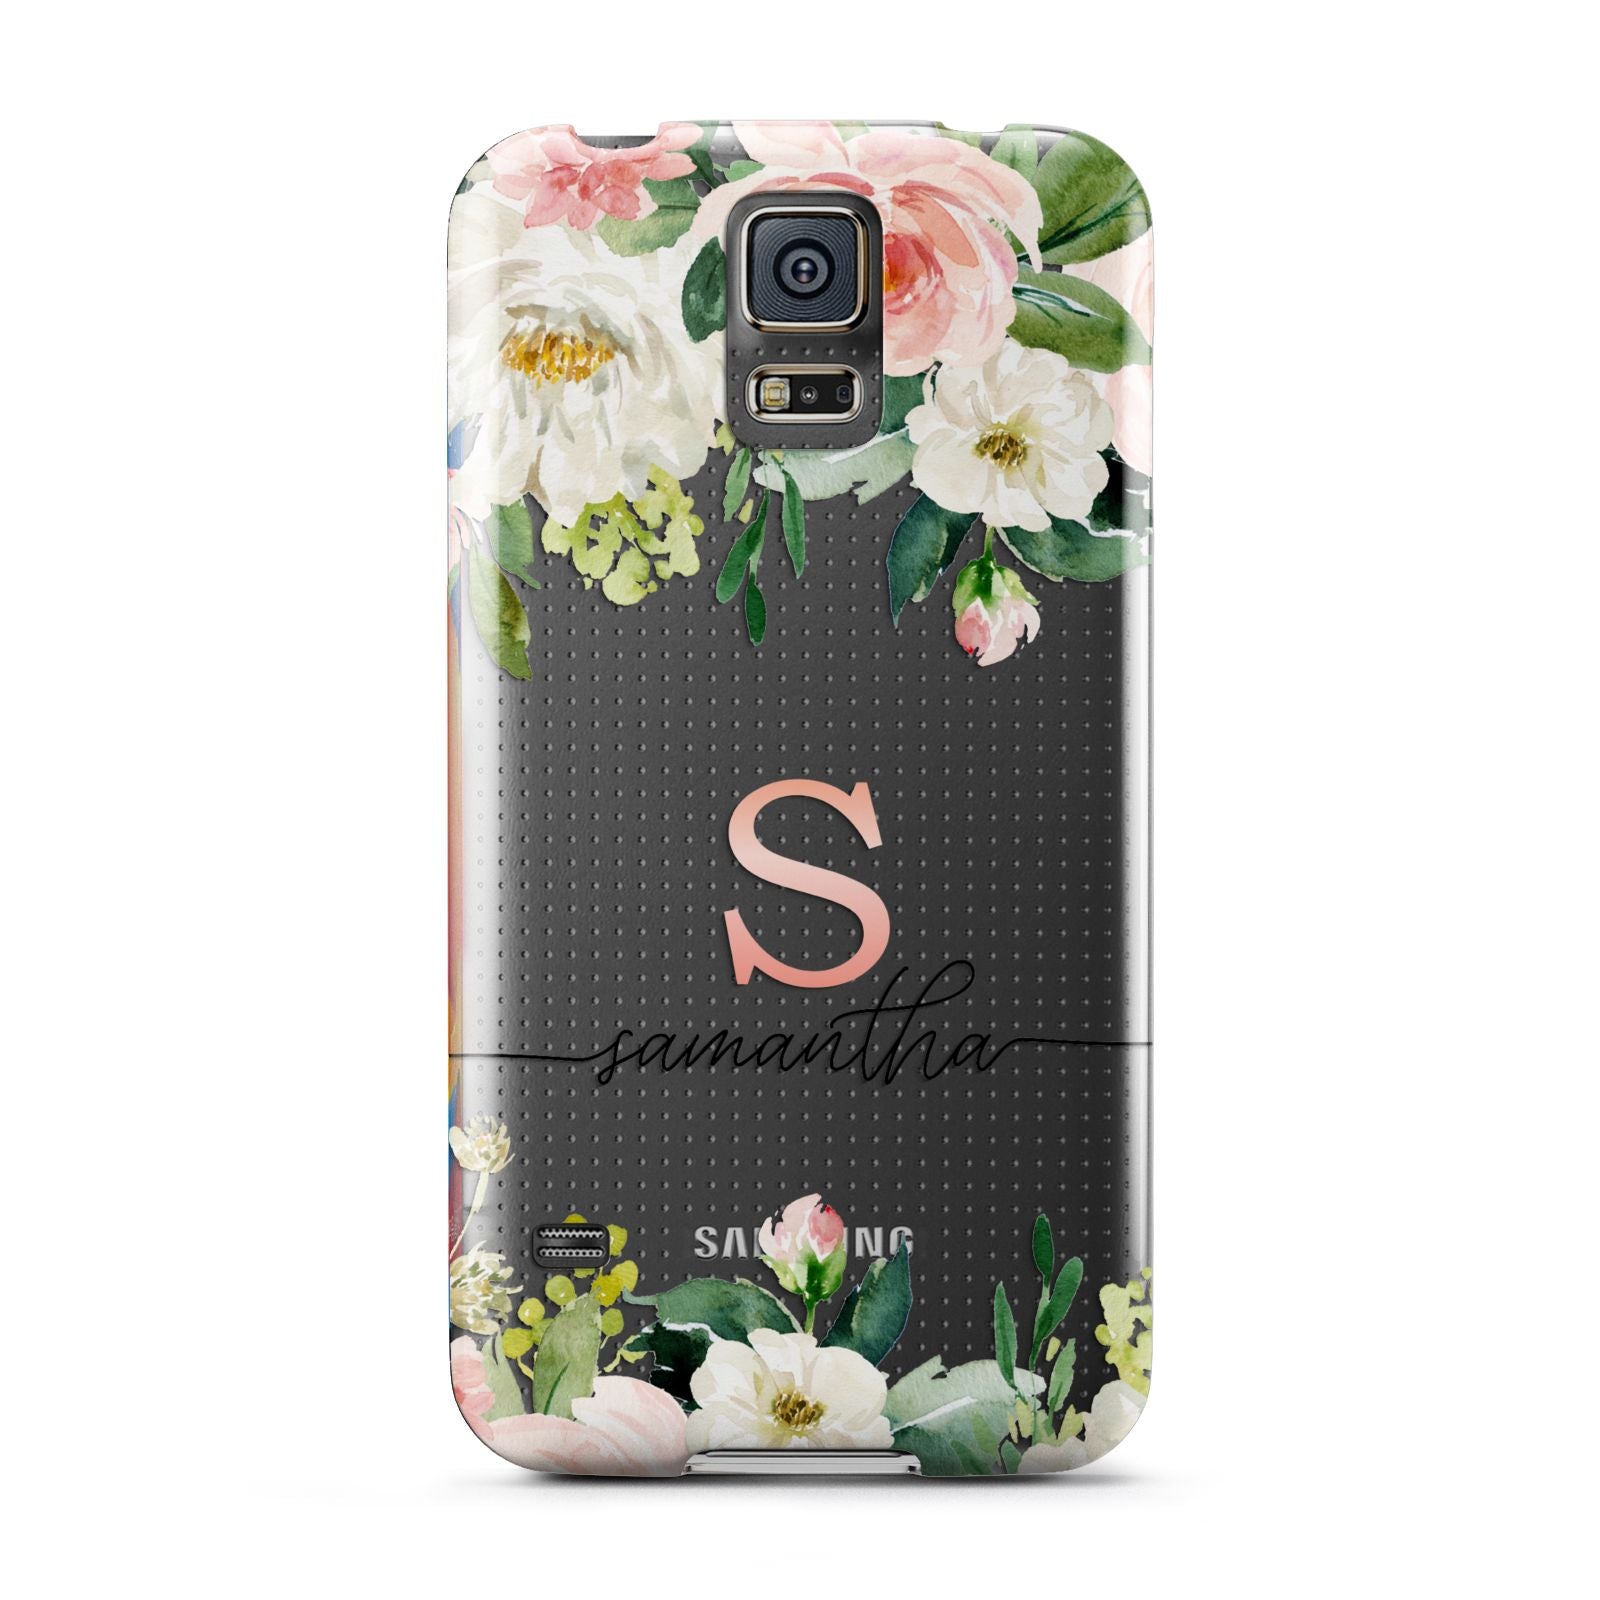 Monogrammed Floral Roses Samsung Galaxy S5 Case